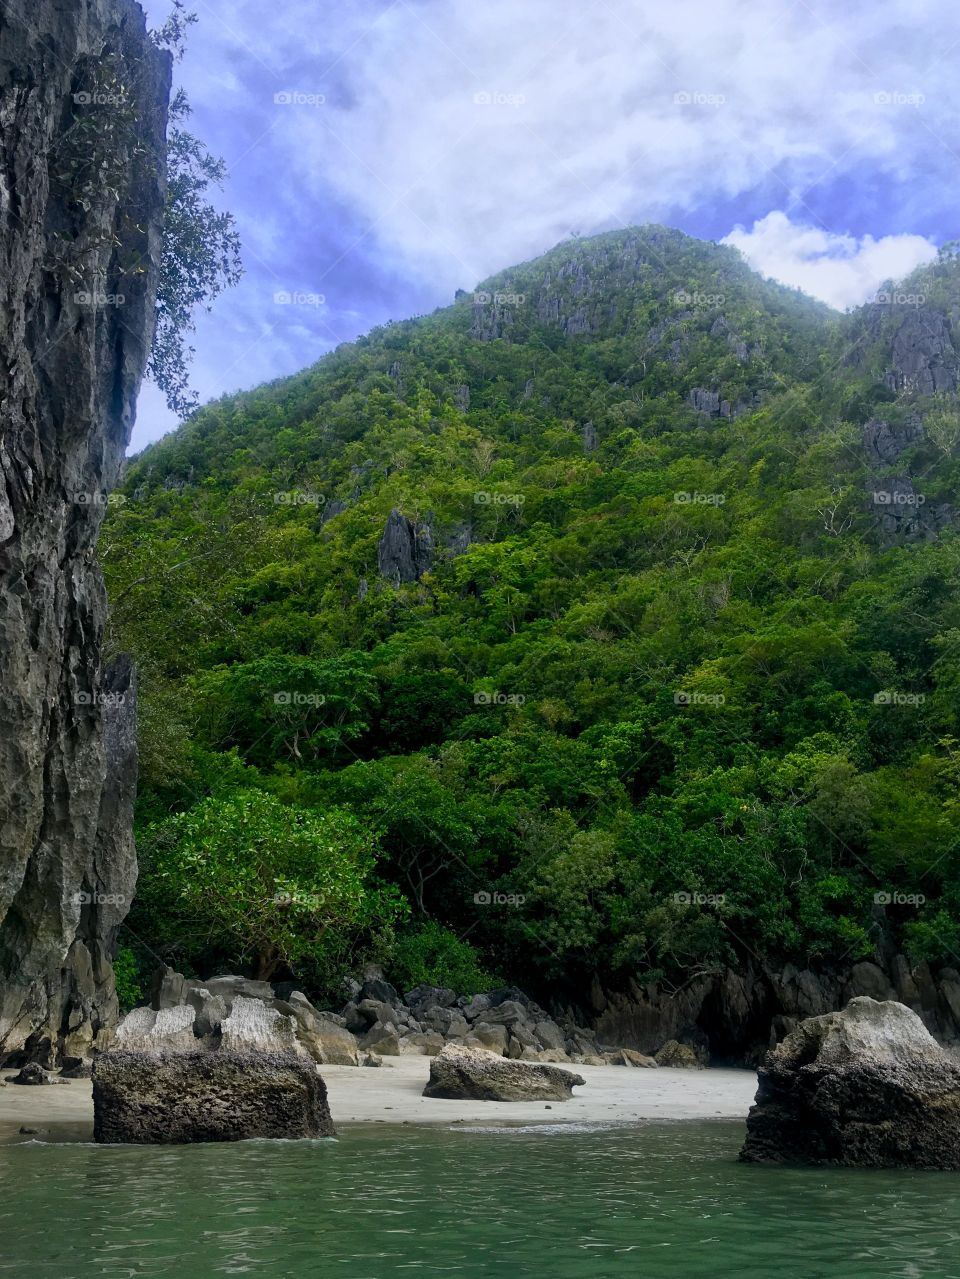 Forest covered mountains on a beach shore